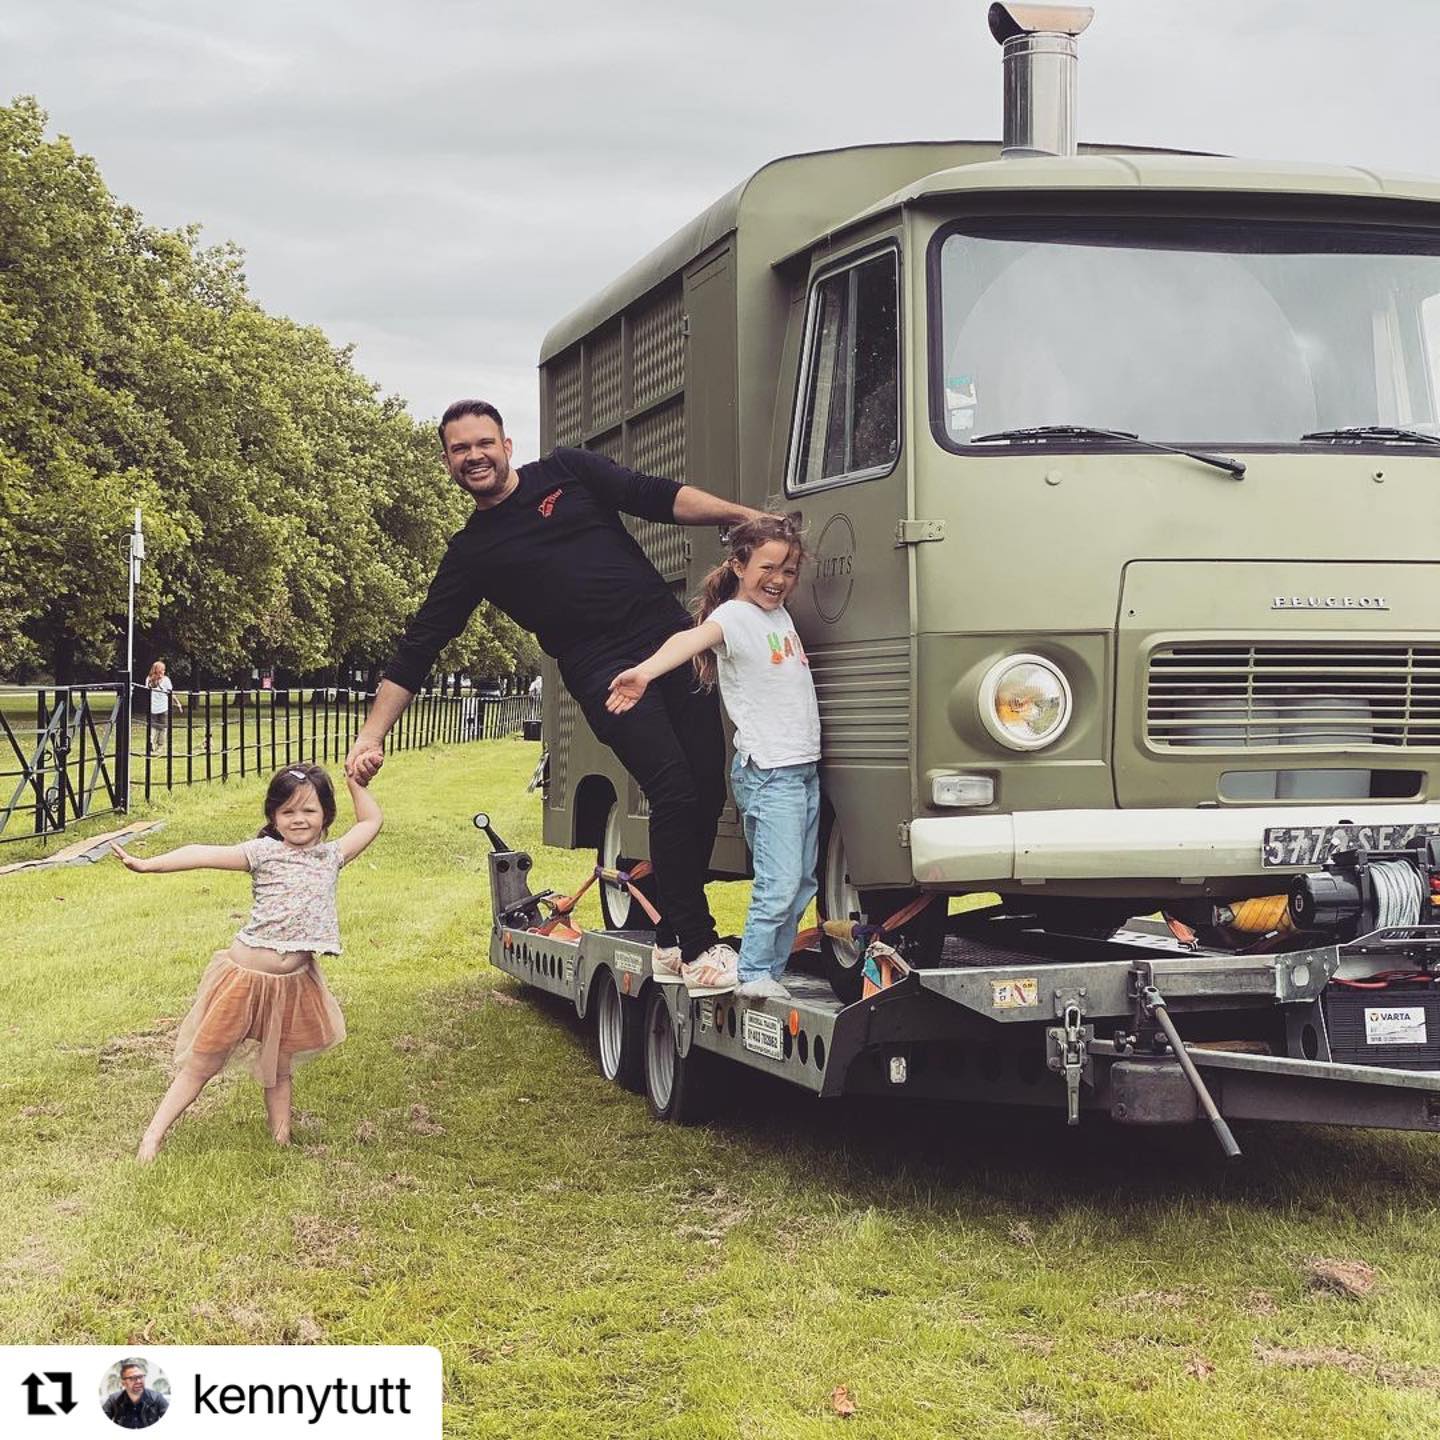 @kennytutt - winner of the MasterChef 2018 off to Blenheim Palace with the beautiful vintage Peugeot food truck on one of our car trailers from our hire fleet.

#Repost @kennytutt 
・・・
All set up for a great weekend @fantasticfoodfestivals @blenheimpalace. Serving up some delicious steak sandwiches Friday to Sunday 🚛 @tutts_streetfood and  catch me in the chefs tent this Saturday 👨🏻‍🍳
-